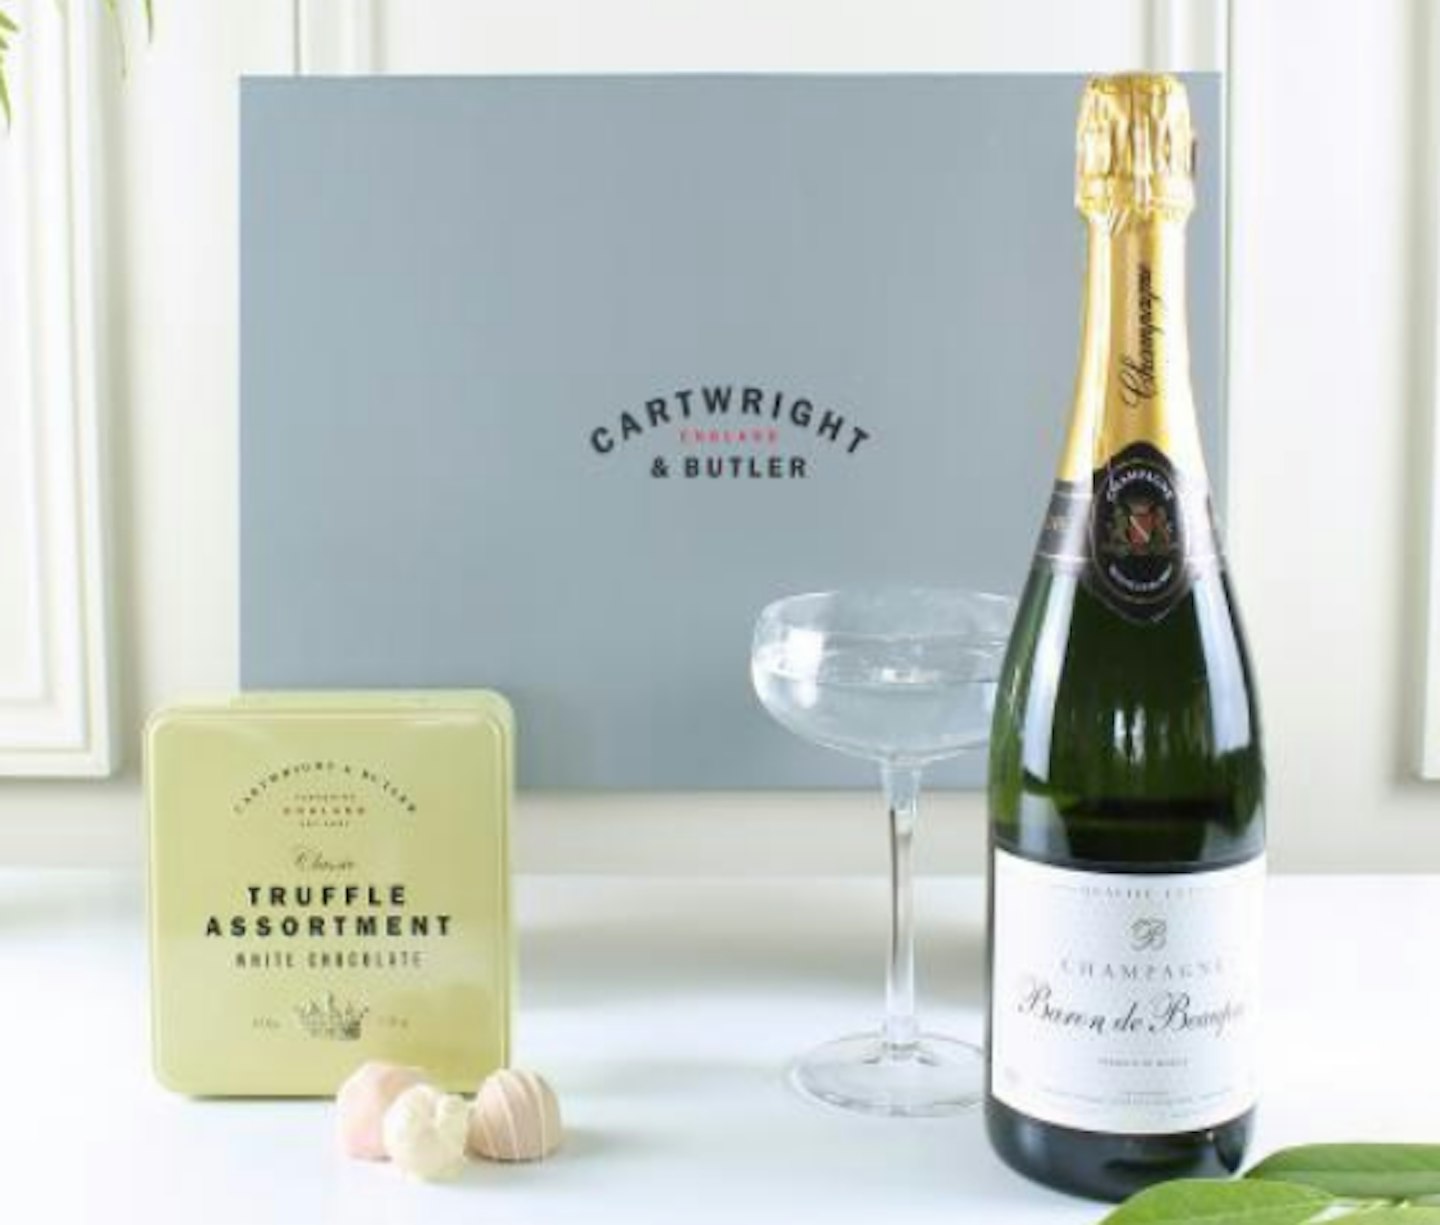 Cartwright & Butler Champagne and Truffle gift box